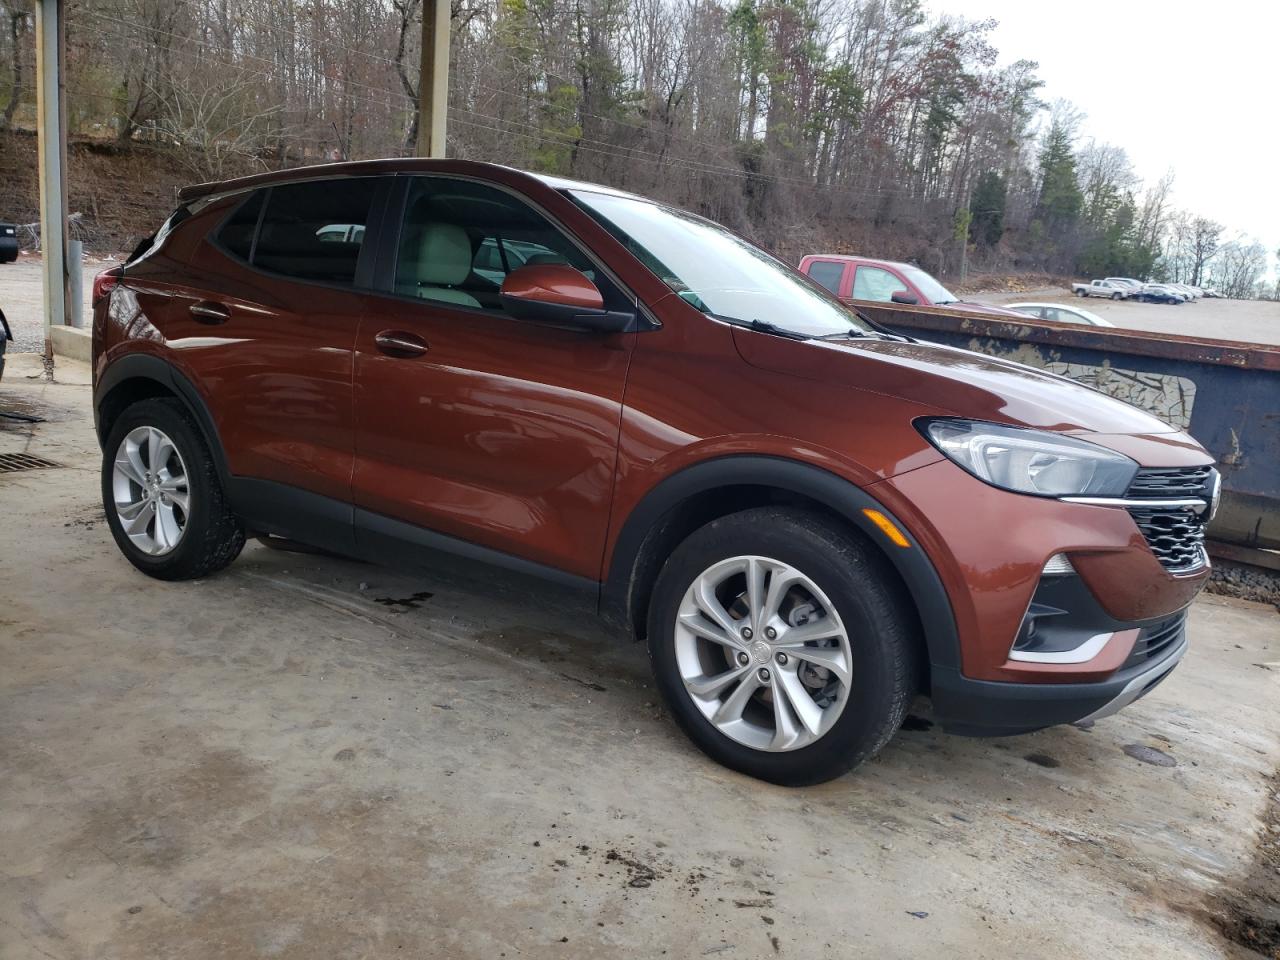 KL4MMBS29LB****** Salvage and Wrecked 2020 Buick Encore in Alabama State